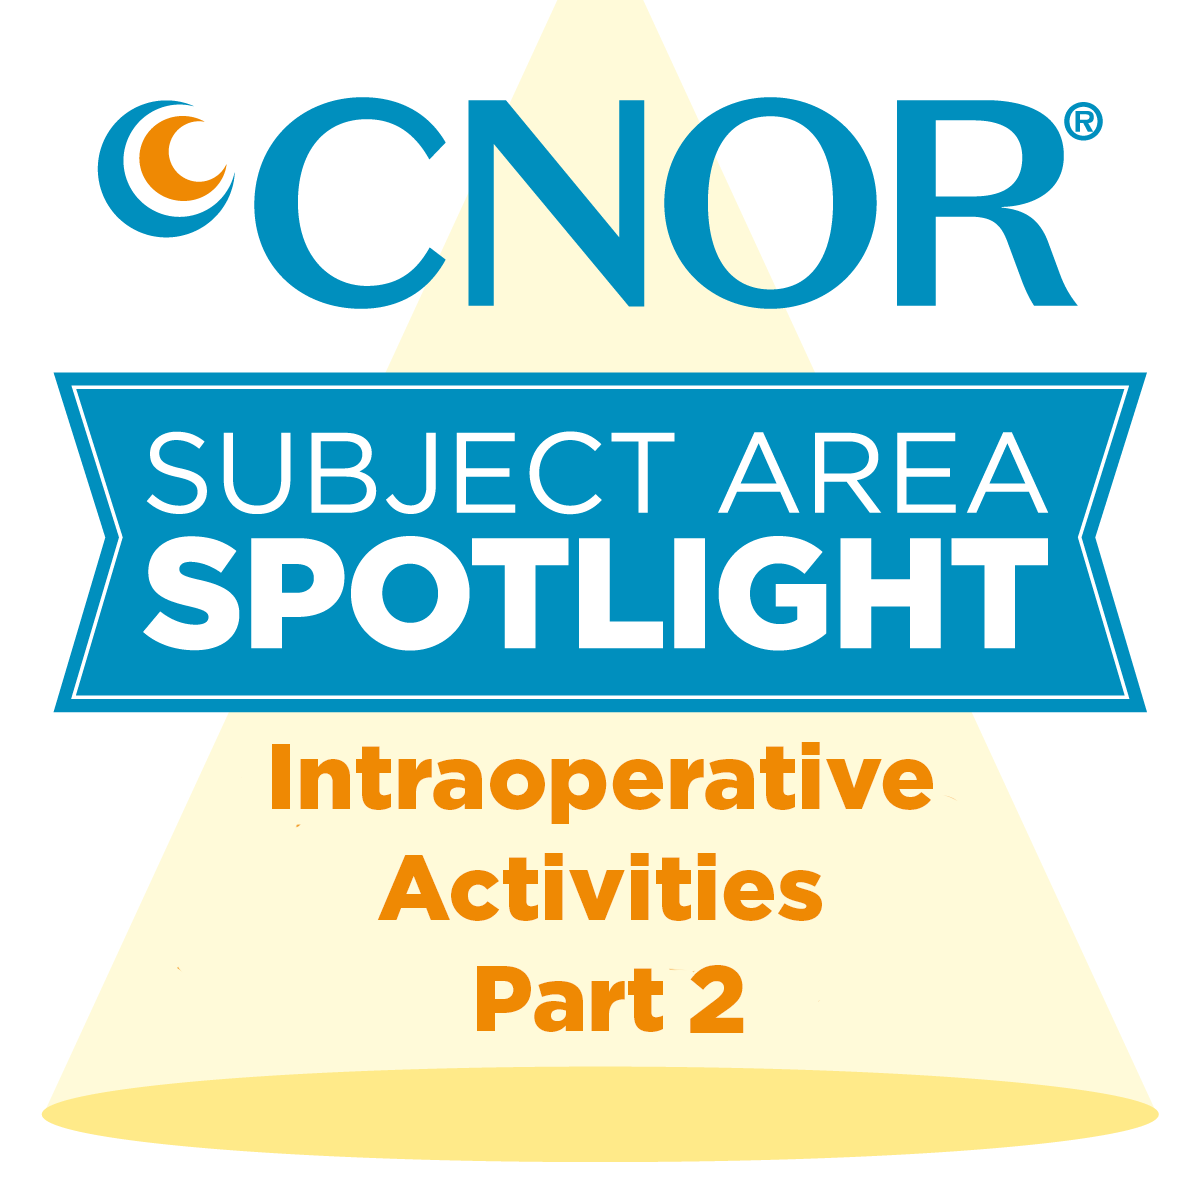 CNOR Subject Area Spotlight: Management of Intraoperative Activities Patient Care and Safety Part 2